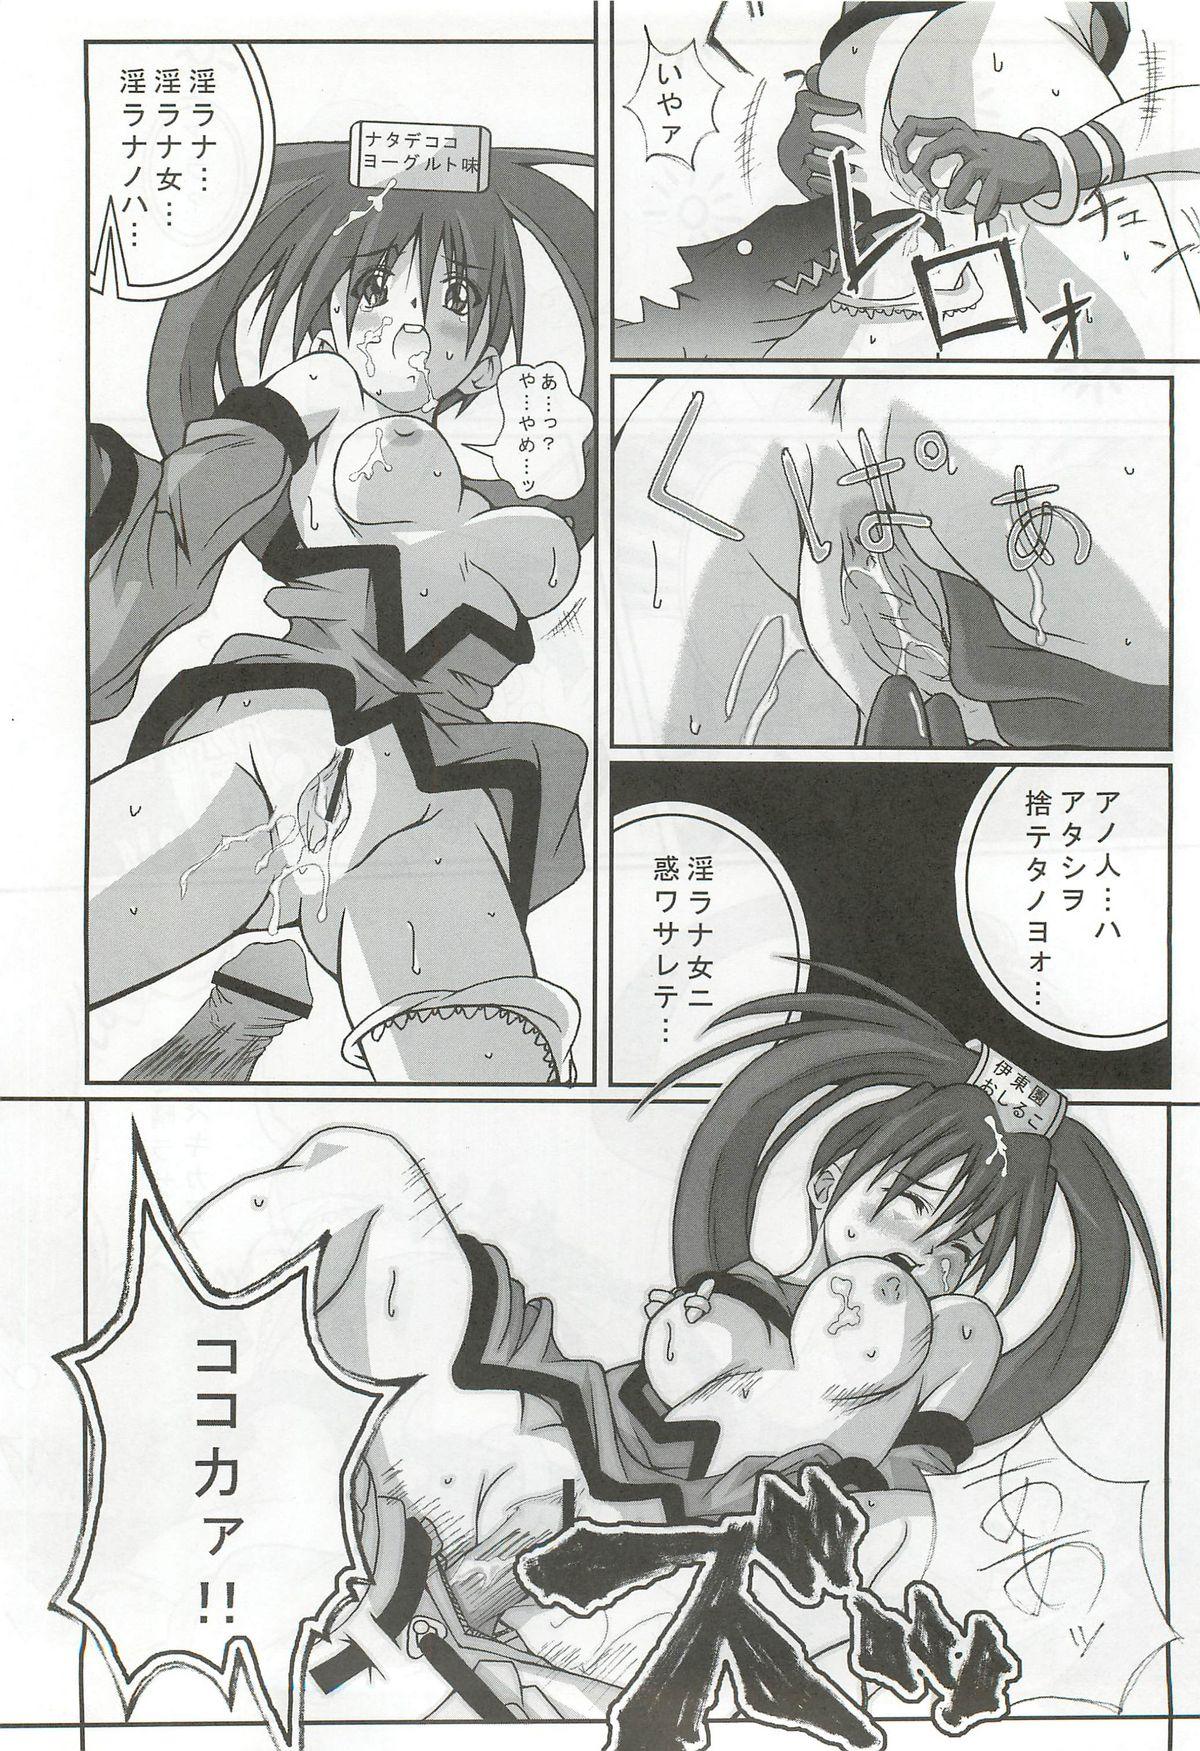 Vietnamese Passionless 2 - Guilty gear Affair - Page 9